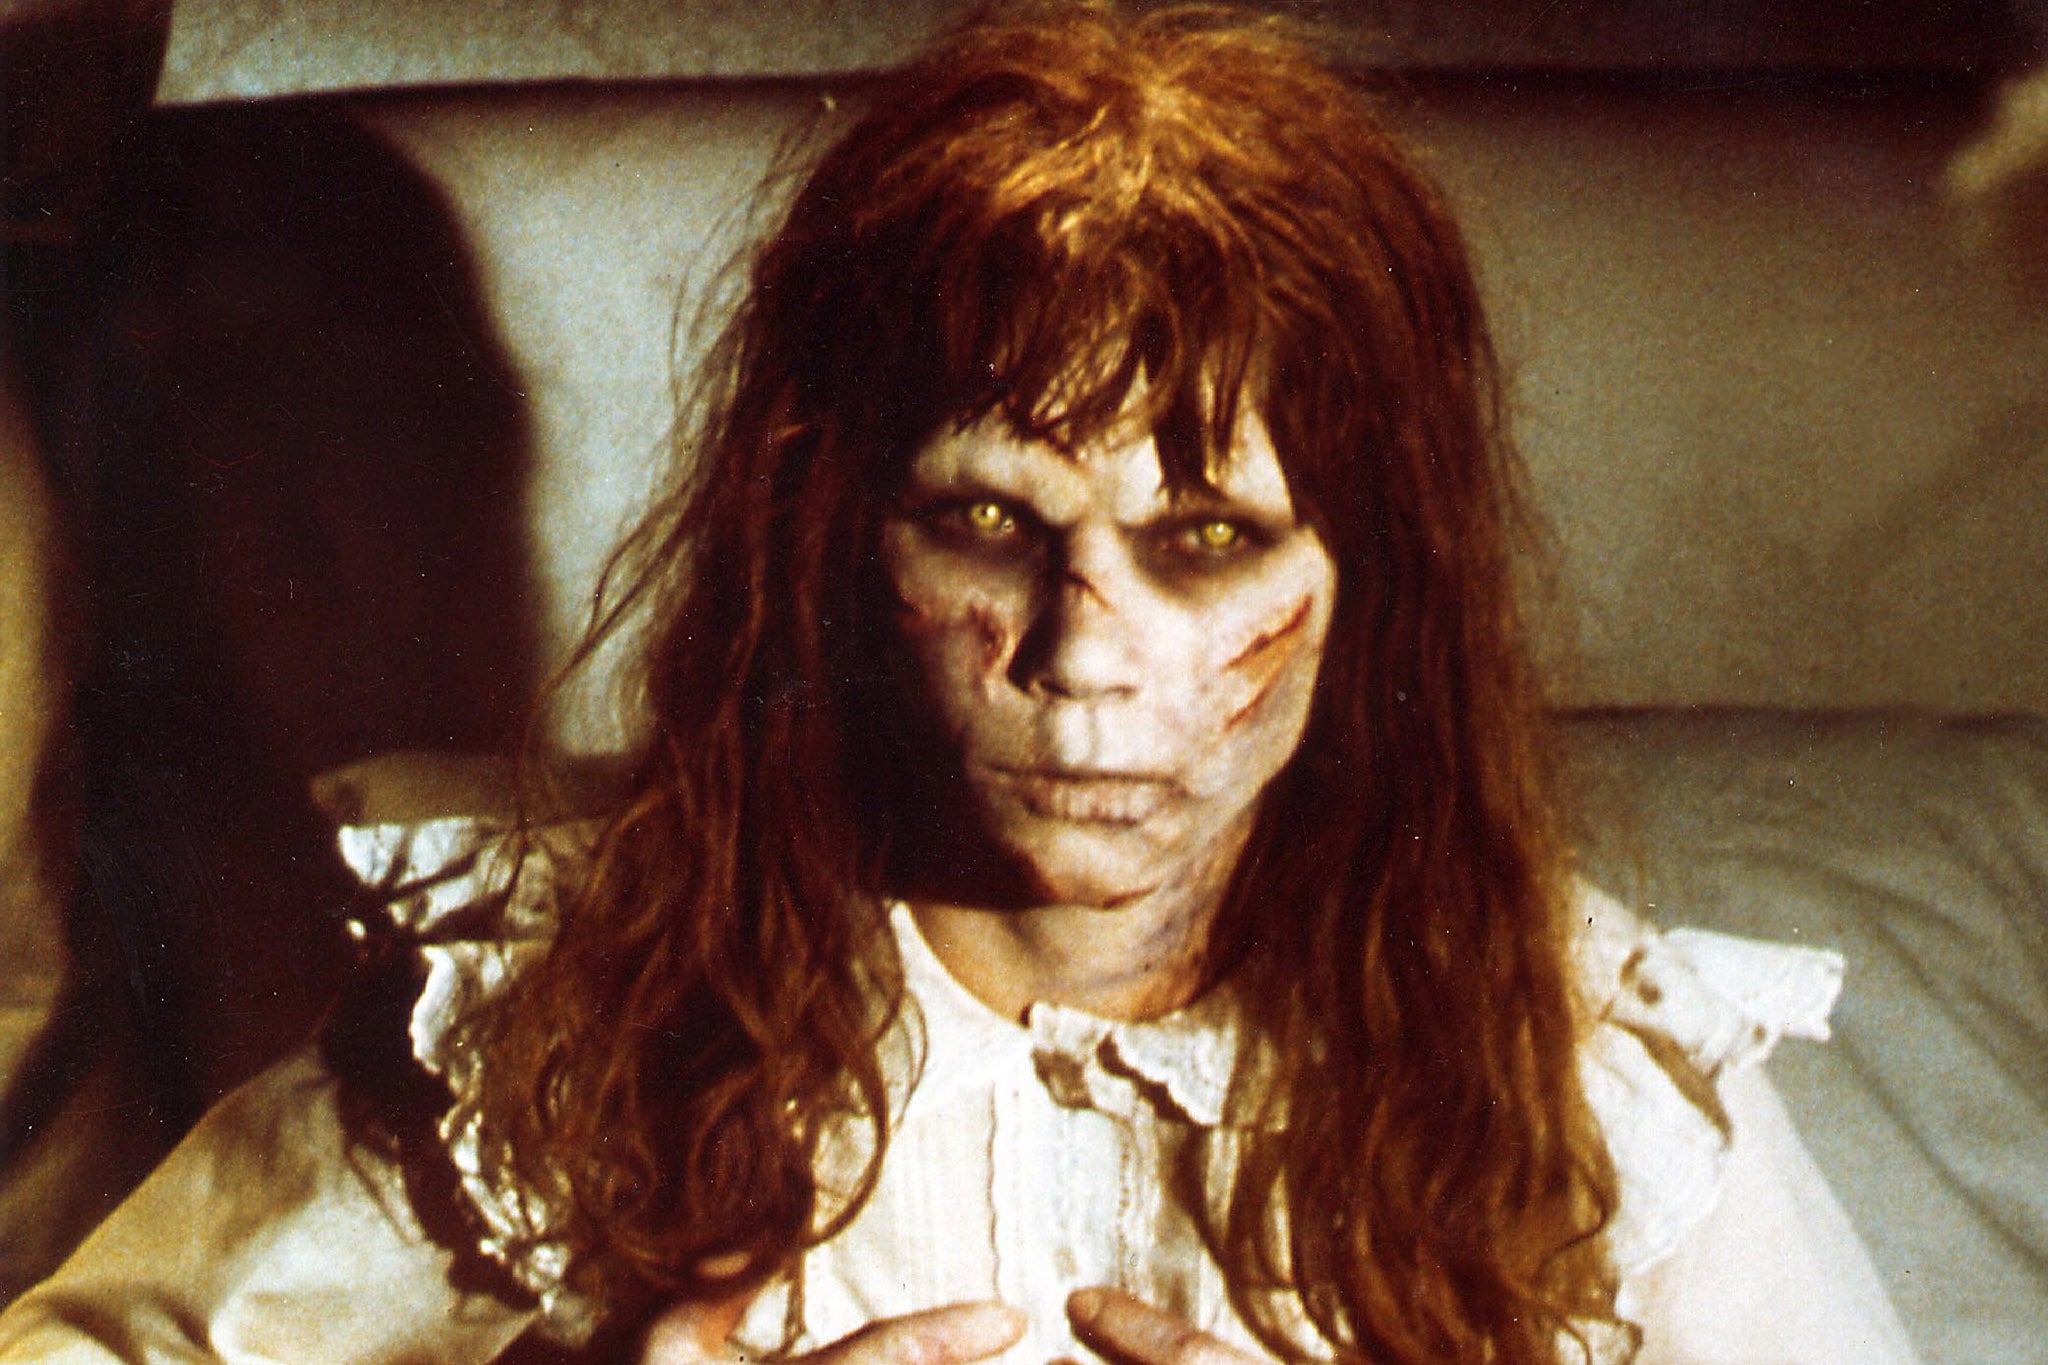 Foul-mouthed, sore-ridden and yellow-eyed: the 13-year-old Linda Blair in ‘The Exorcist’